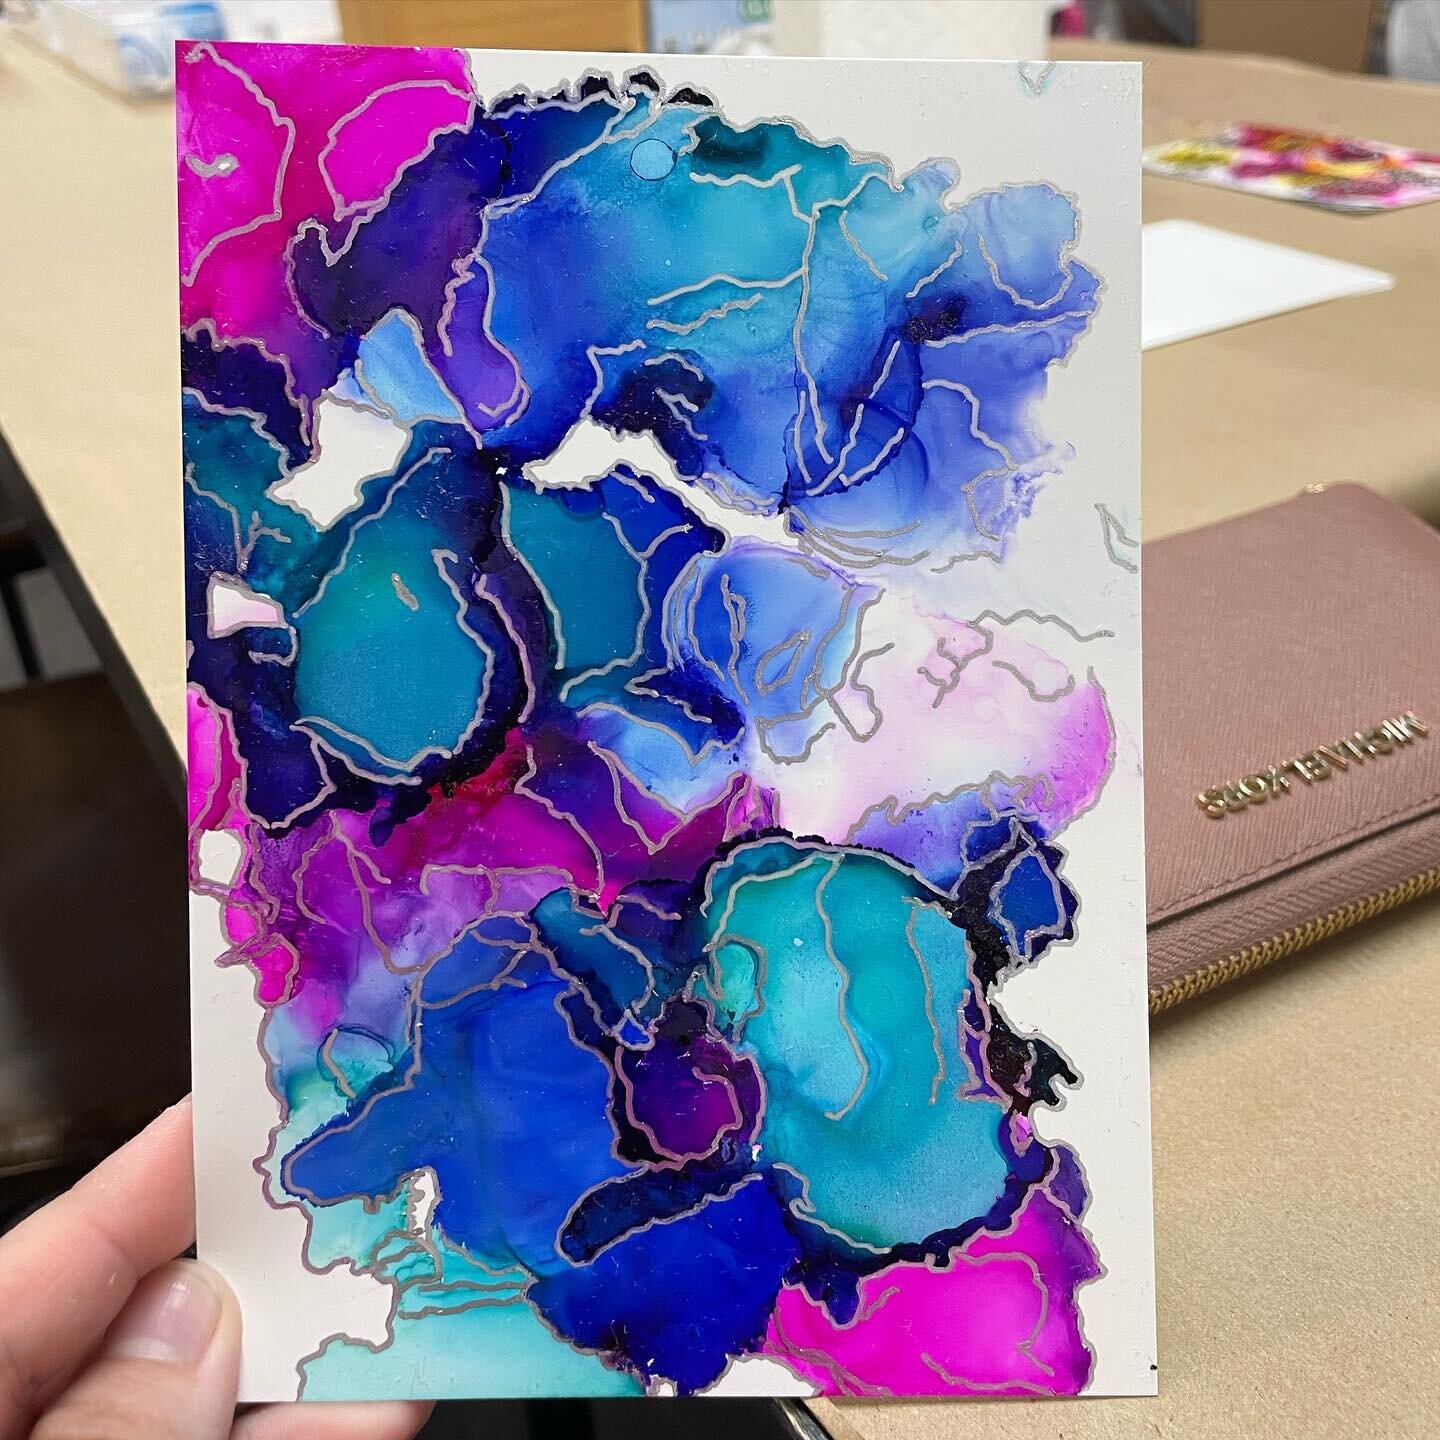 I took an AWESOME alcohol ink class tonight with @leeannlander.art and I&rsquo;m obsessed with how it turned out! 😍😍 #daalmember  #artistsoninstagram #artistsofinstagram #614life #handmadeohio #ohiohandmade #ohiocreatives #ohiogram #asseenincolumbu